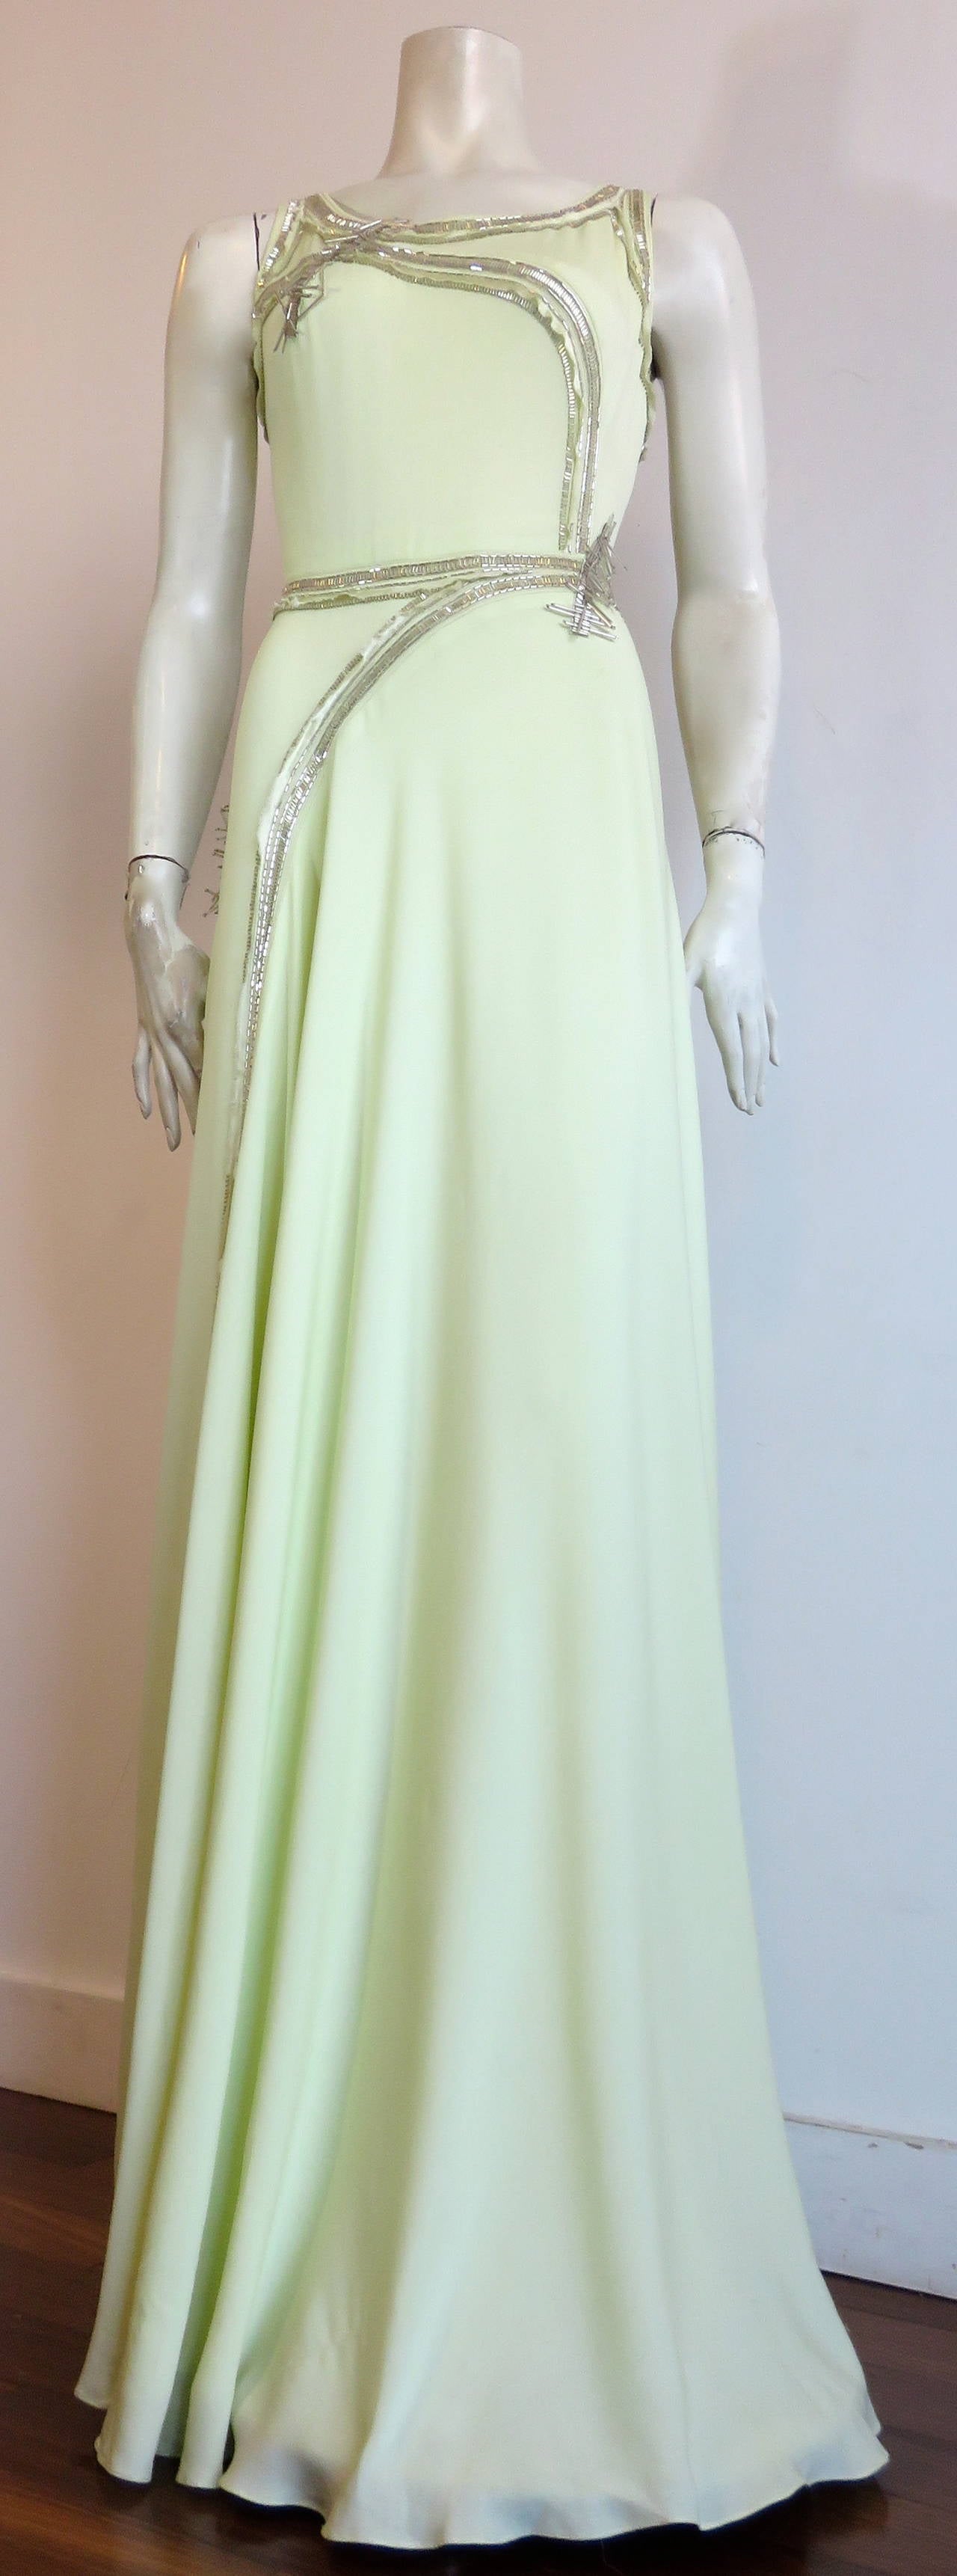 New with tags, CAROLINA HERRERA, embellished silk evening dress.

Beautiful, jade-frost color, silk crepe shell with opulent, platinum-tone, hand beadwork.

Gorgeous, statuesque silhouette.

Regimented cylindrical beading with raw-edged, silk